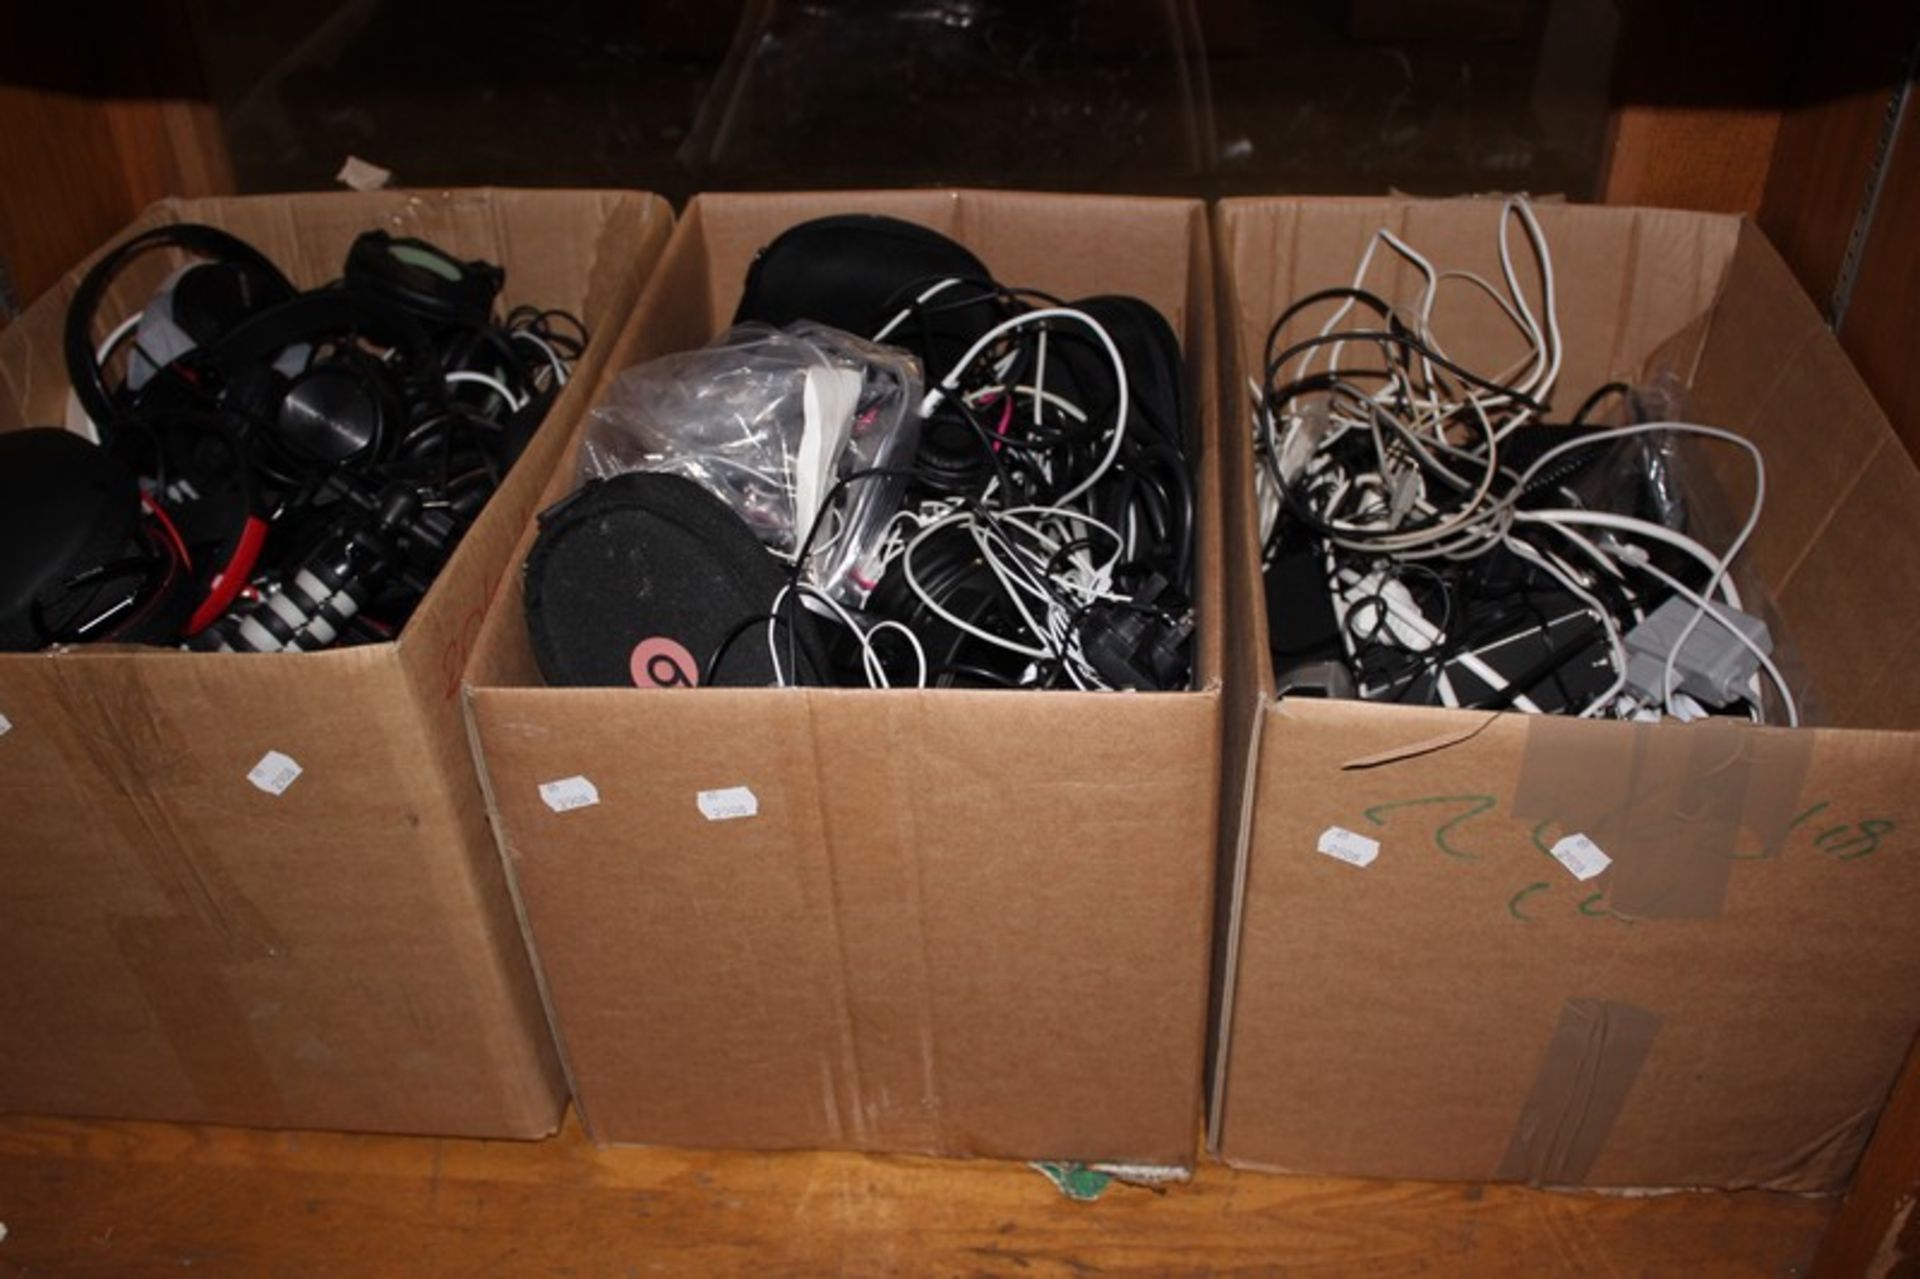 Three boxes of headphones and electrical items and wires etc.